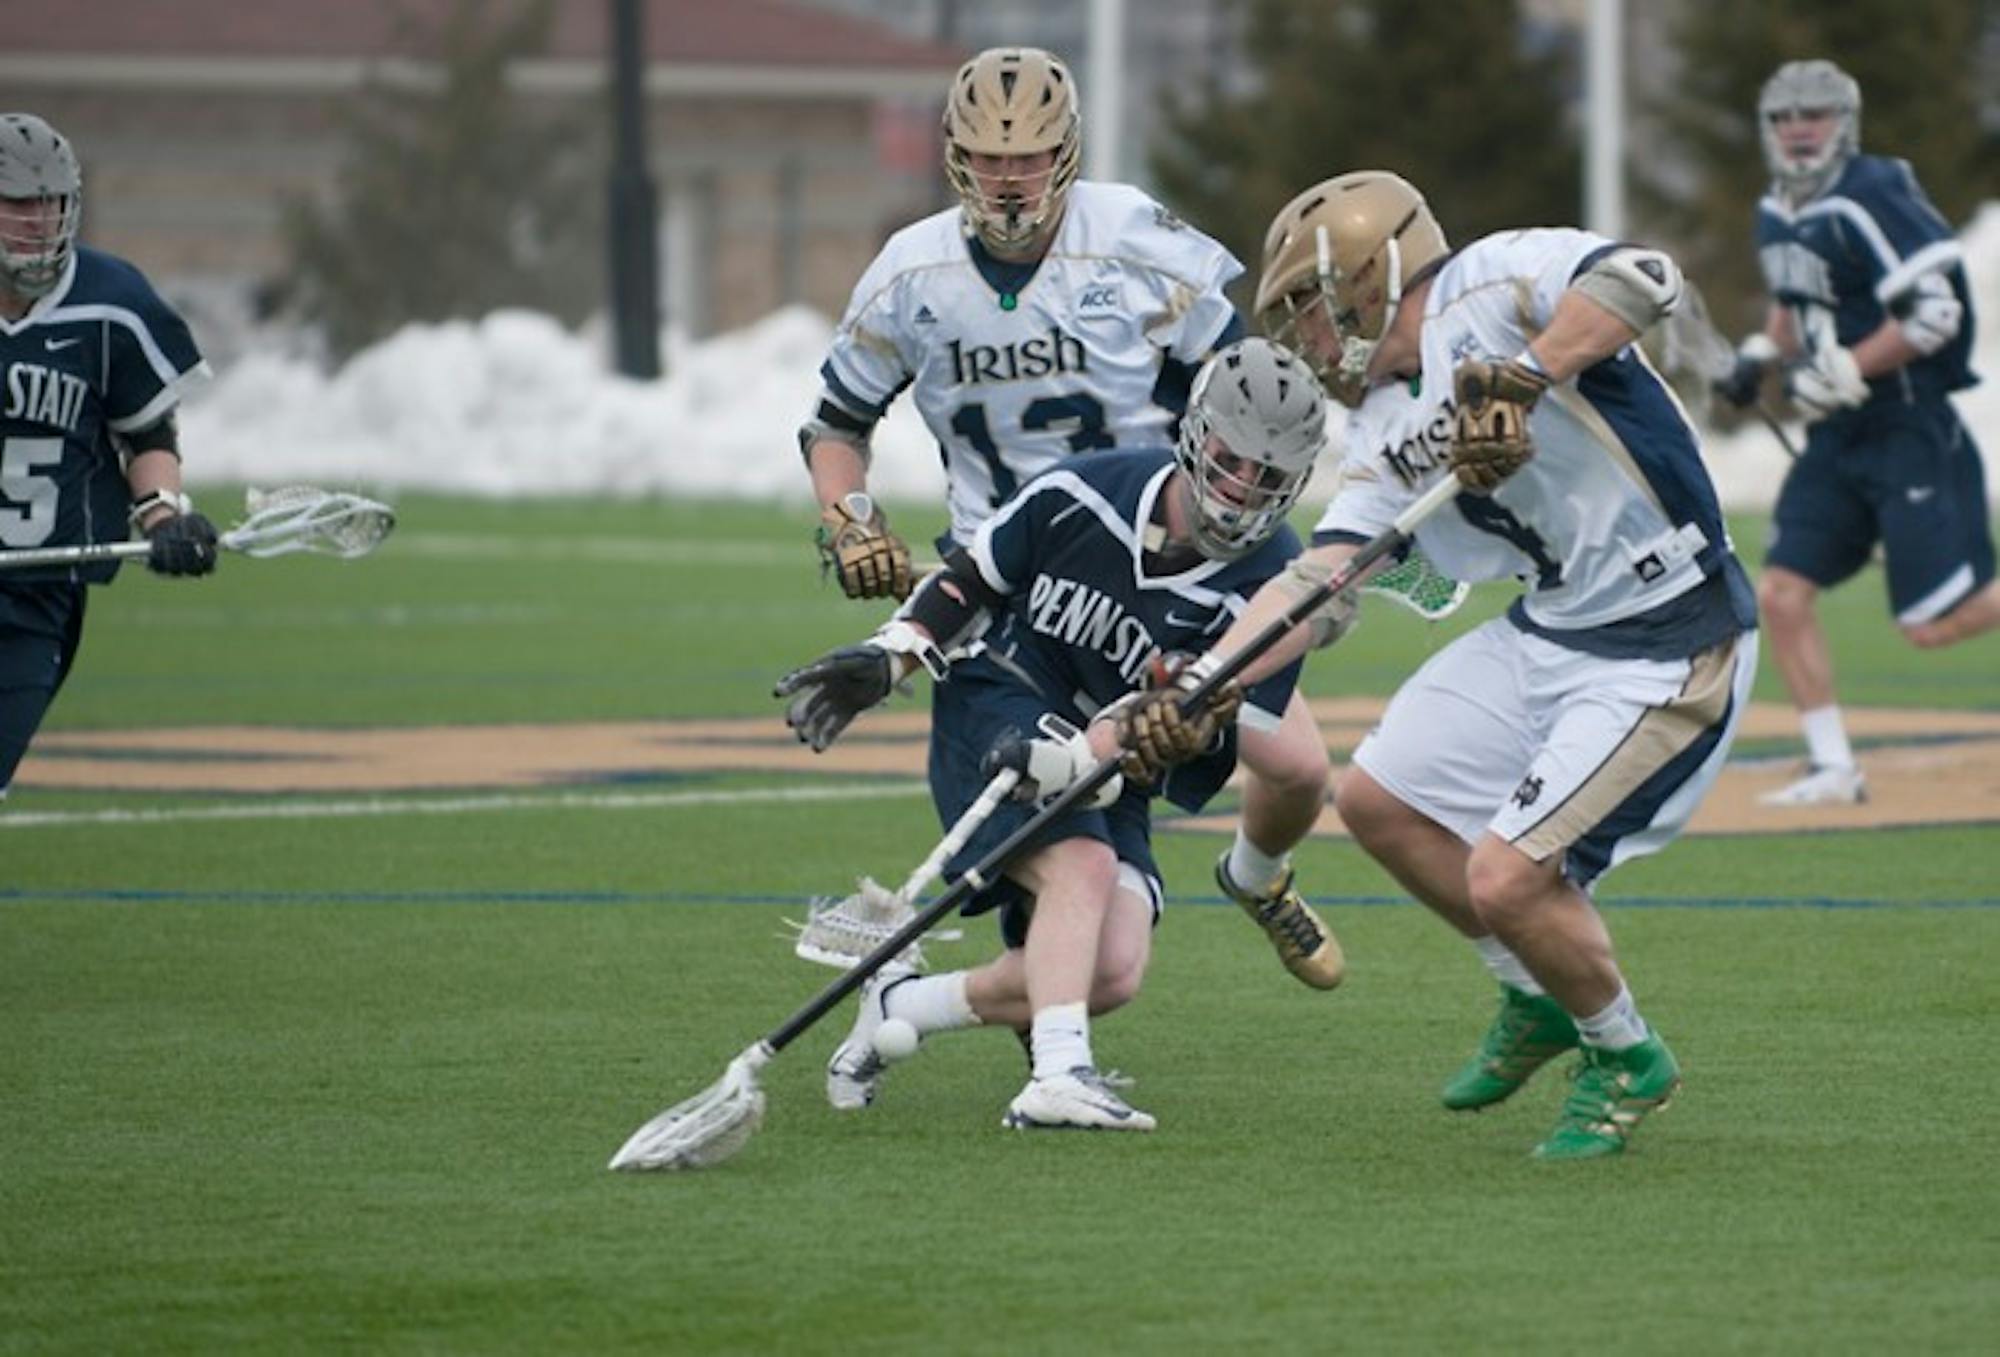 Irish senior captain and defenseman Stephen O’Hara battles for a ground ball during Notre Dame’s 8-7 loss to Penn State on Feb. 22.